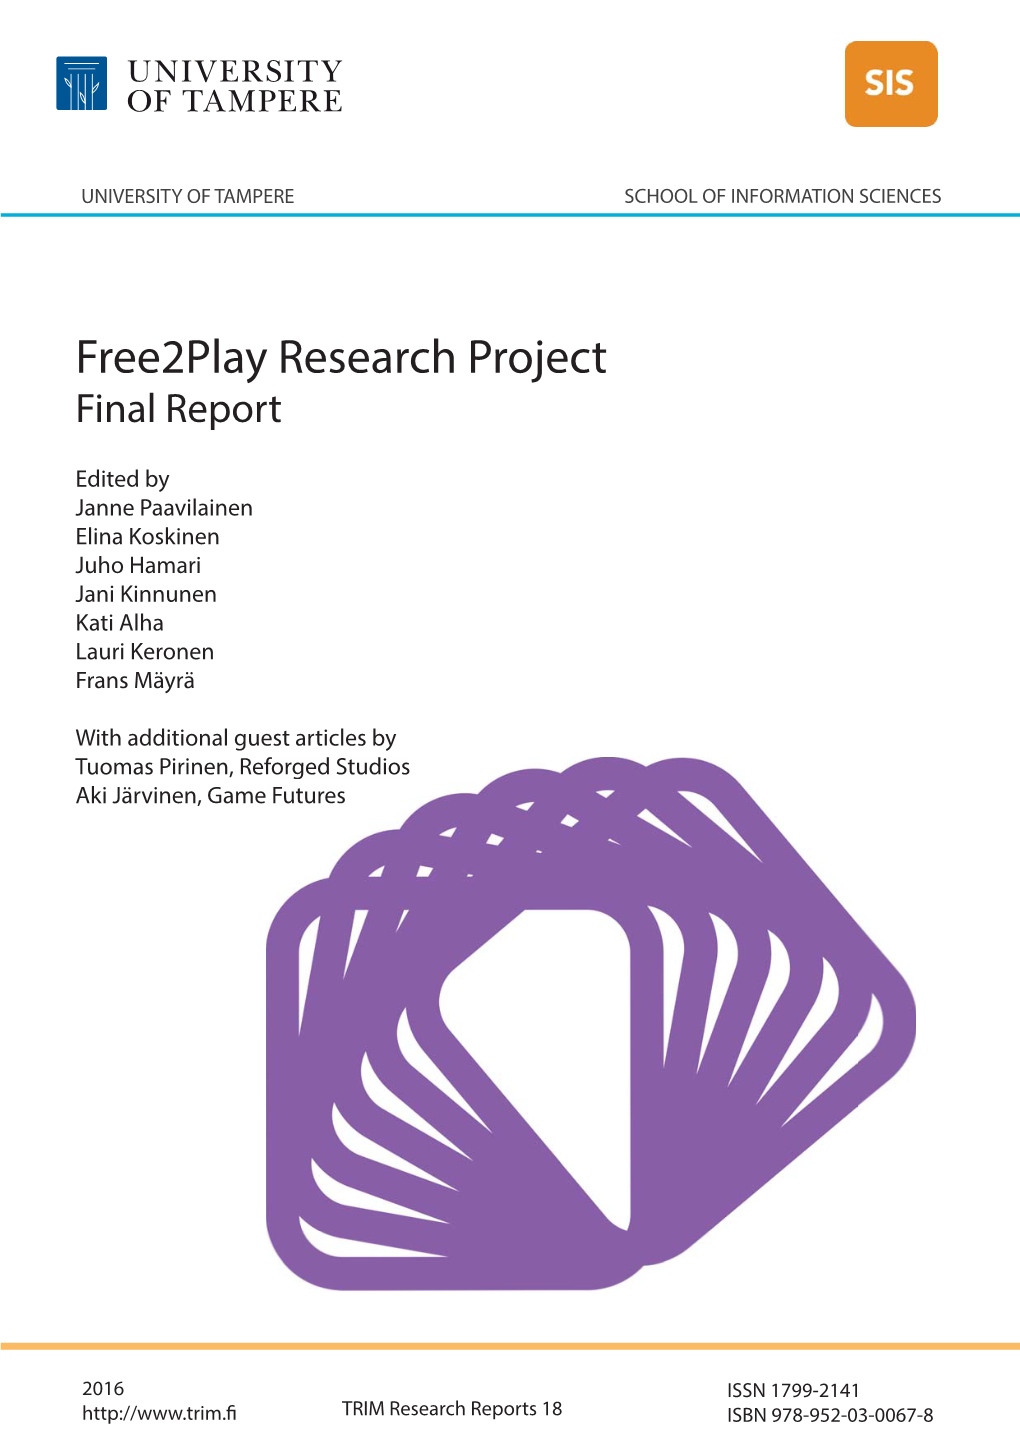 Free2play Research Project Final Report